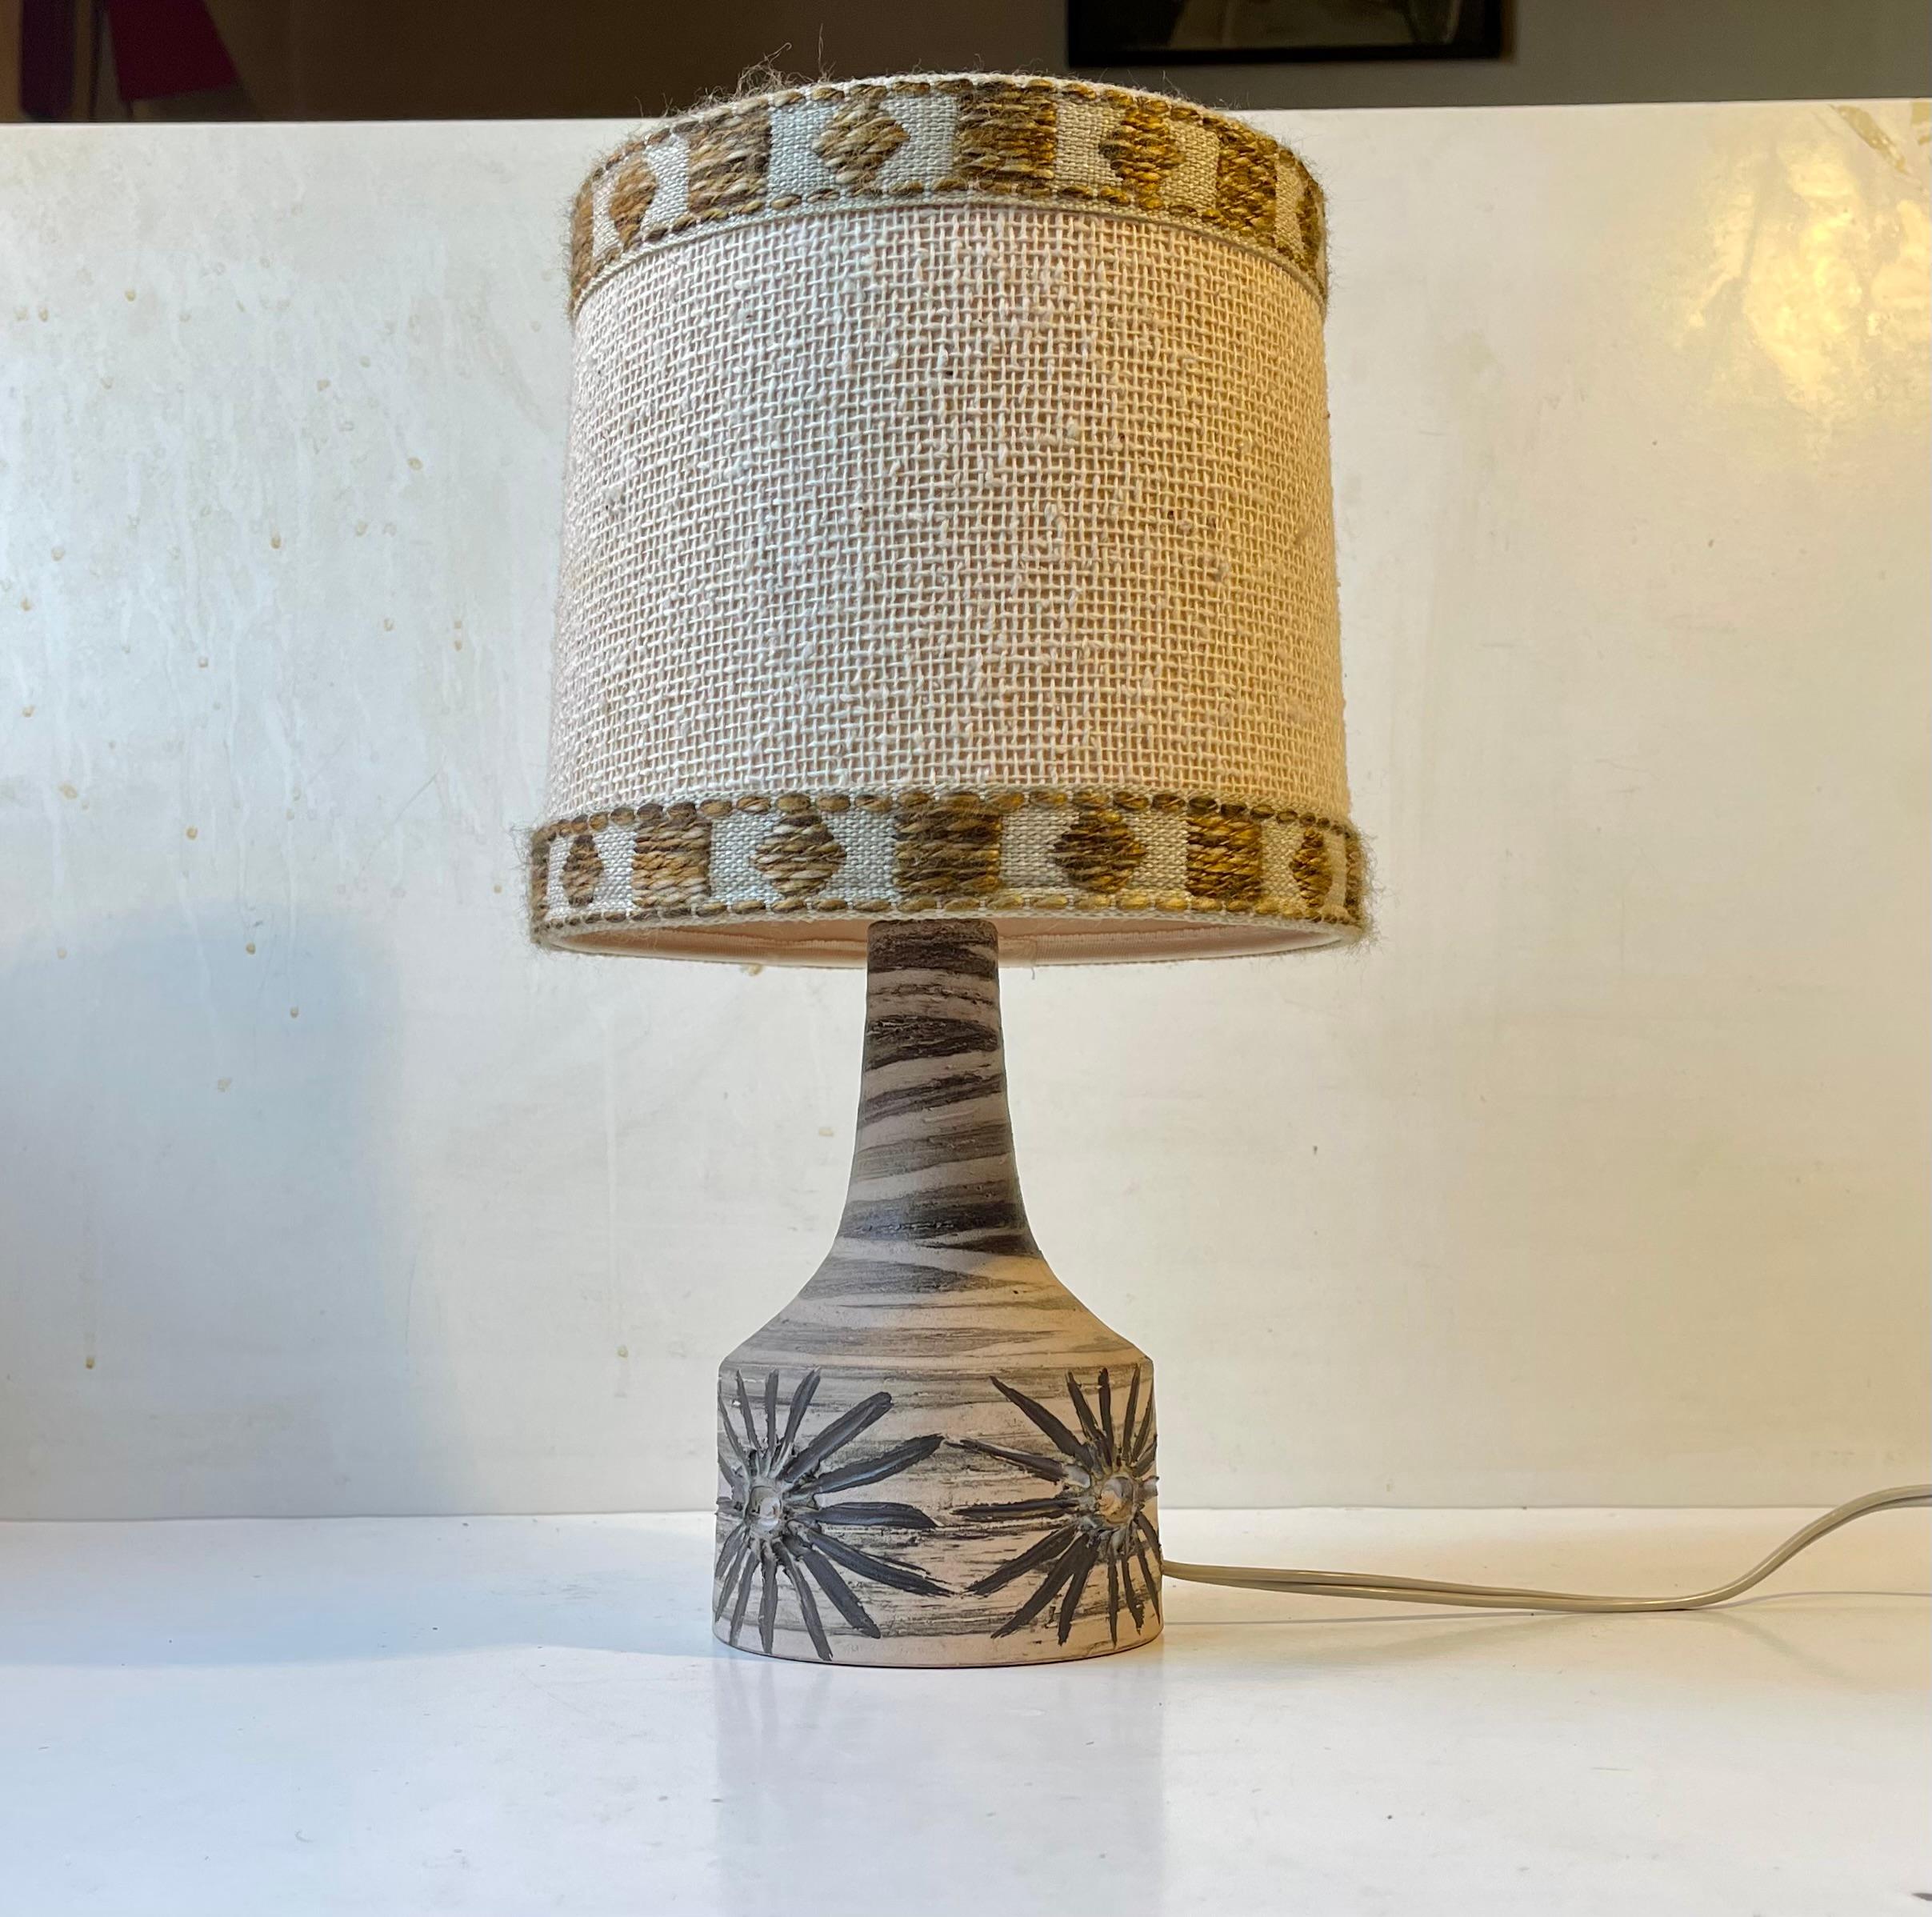 Vintage Danish ceramic table light hand-painted with stripes and flowers in earthy tones. Designed and made at Alfred Dochedahl Studio in Copenhagen circa 1970-75. Stylistically similar to pieces by Søholm and Einar Johansen. It is mounted with